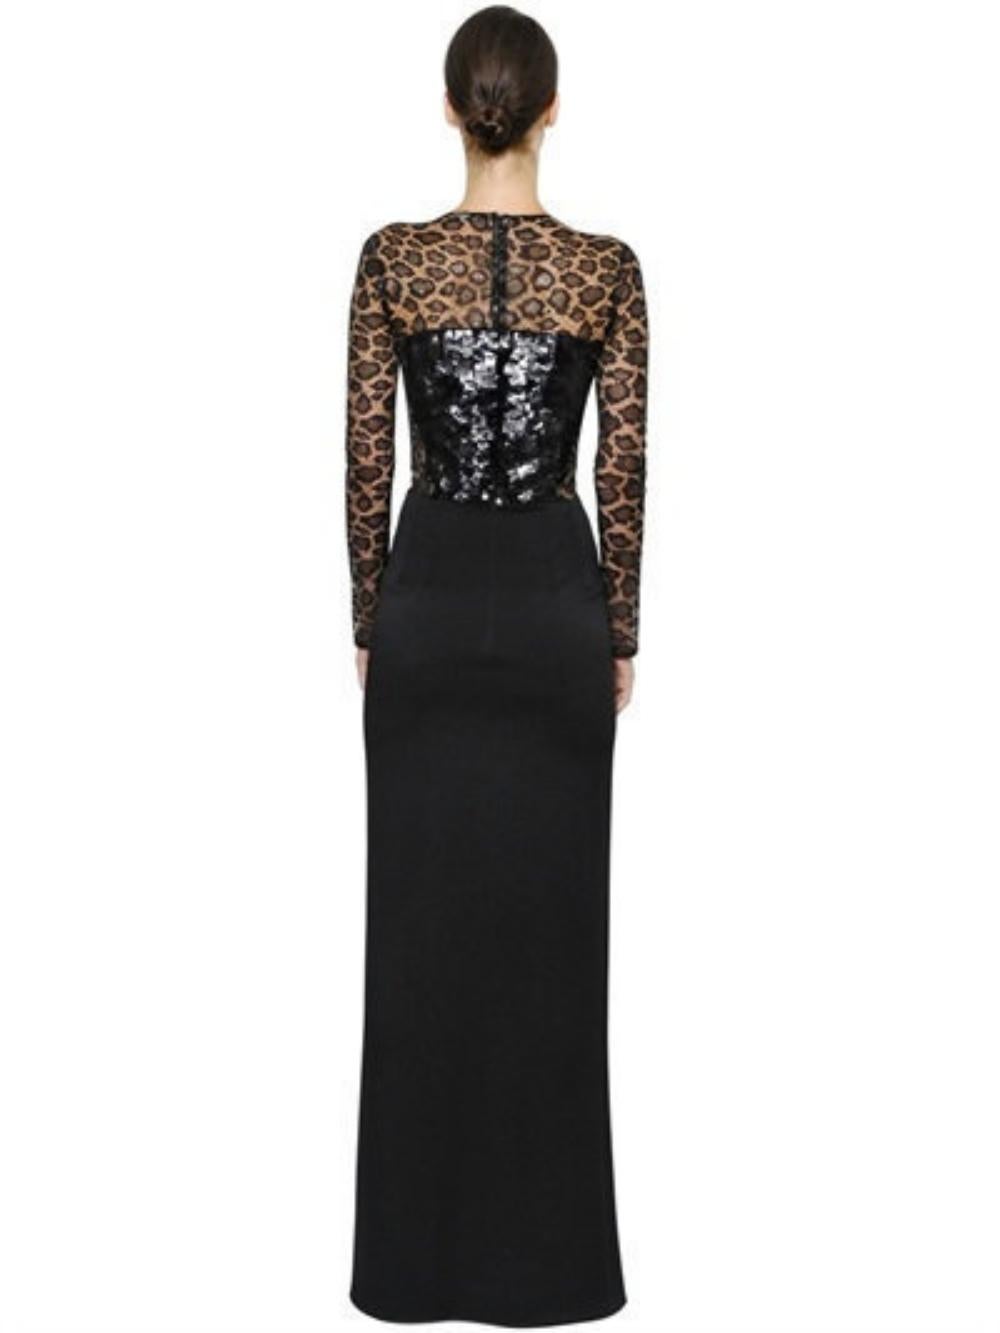  Alexander McQueen Sequin Embellished Lace Mesh Transparent Gown Maxi Dress For Sale 16